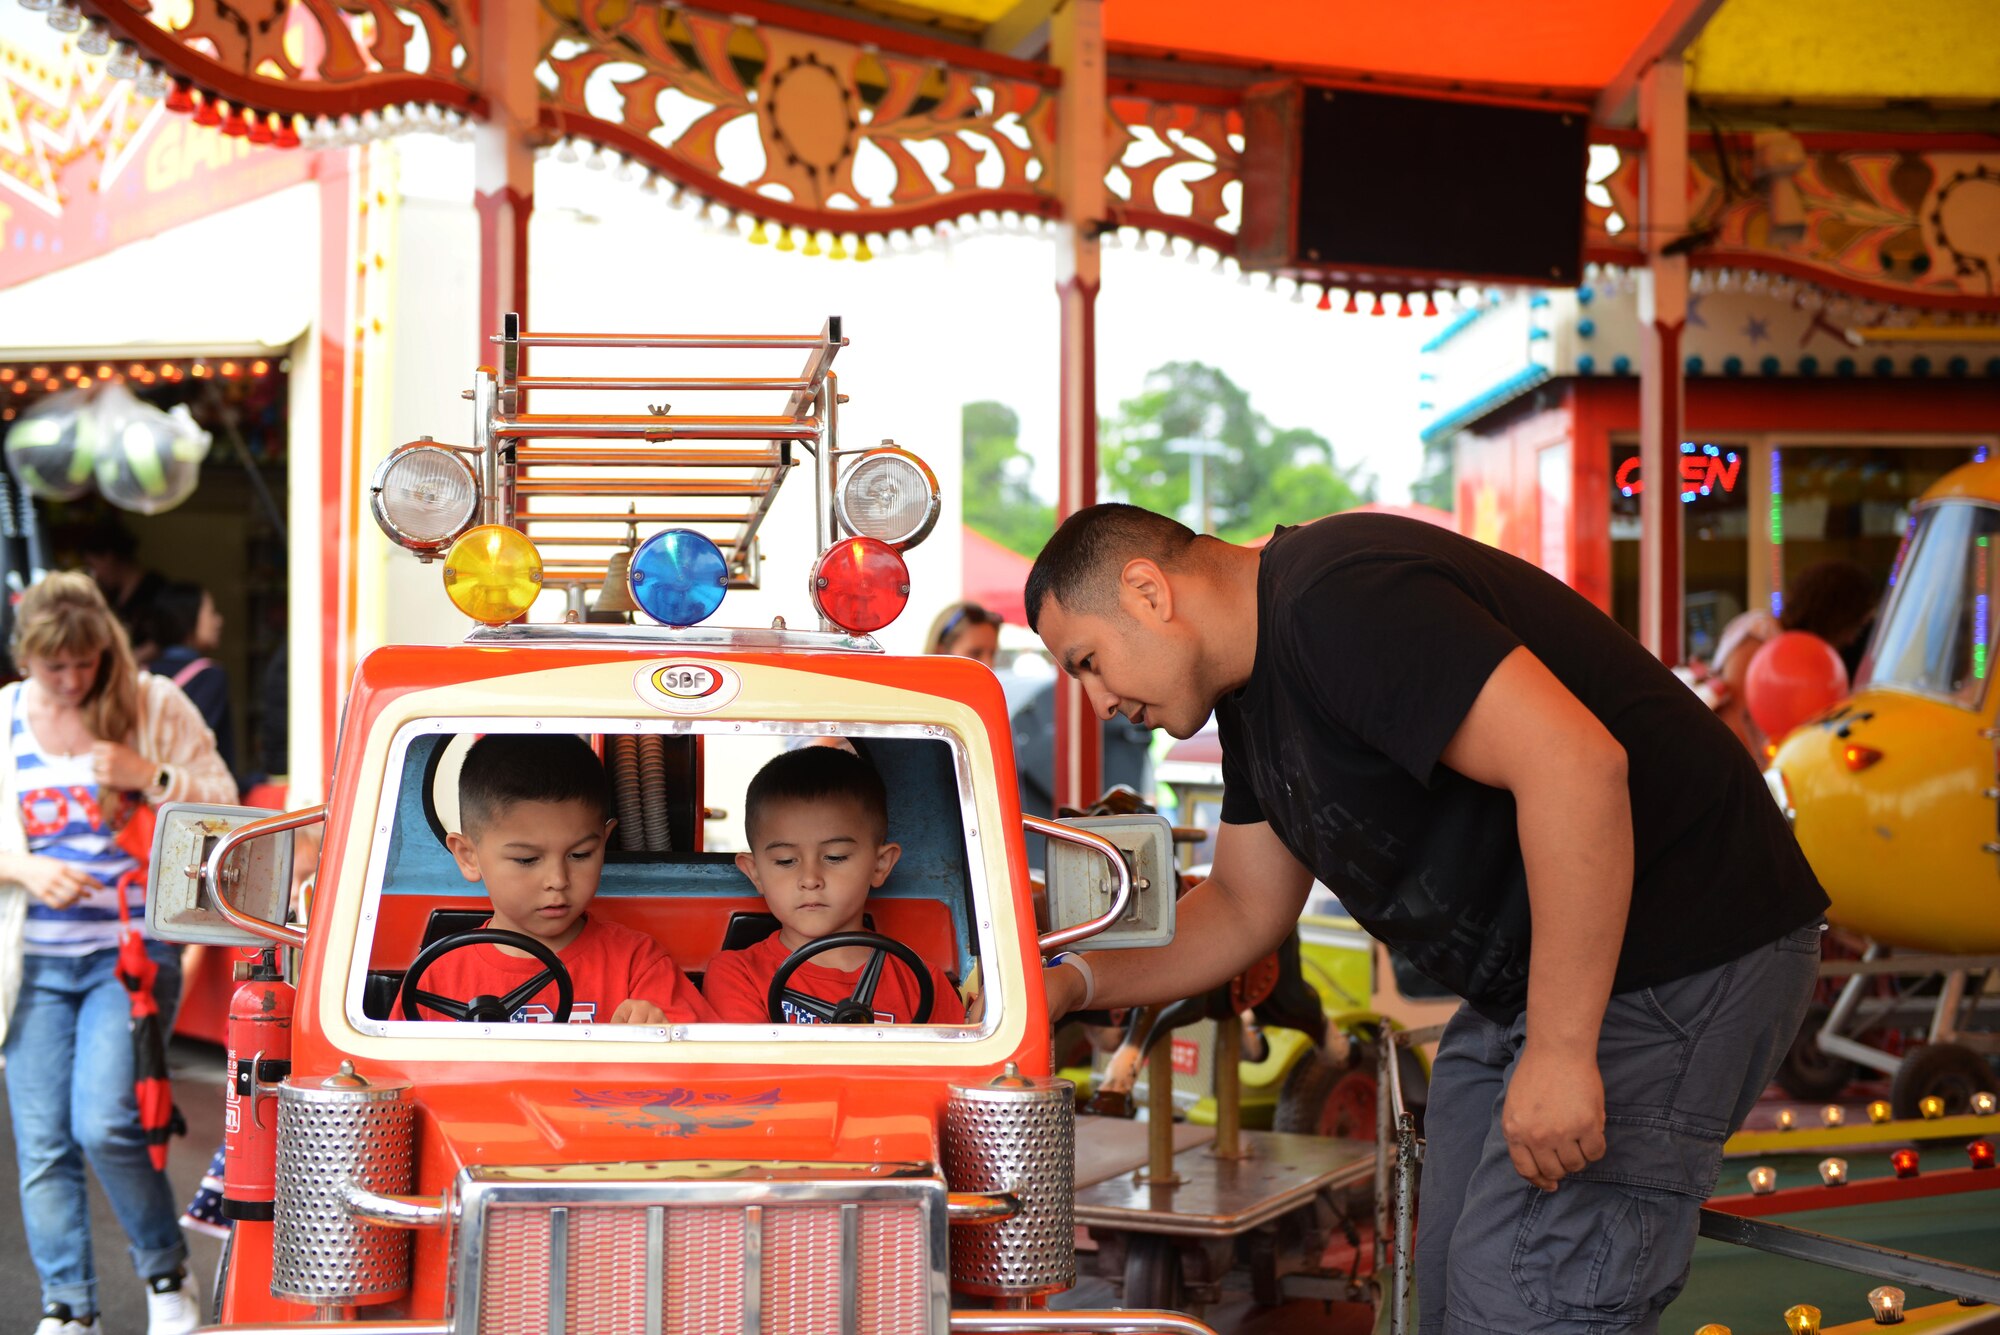 A man sets up his children in a carousel ride during the Freedom Fest 2016 at Ramstein Air Base, Germany, July 4, 2016. The Independence Day celebration included a variety of foods, games, rides and fireworks for Kaiserslautern Military Community members. (U.S. Air Force Photo/ Airman 1st Class Joshua Magbanua)